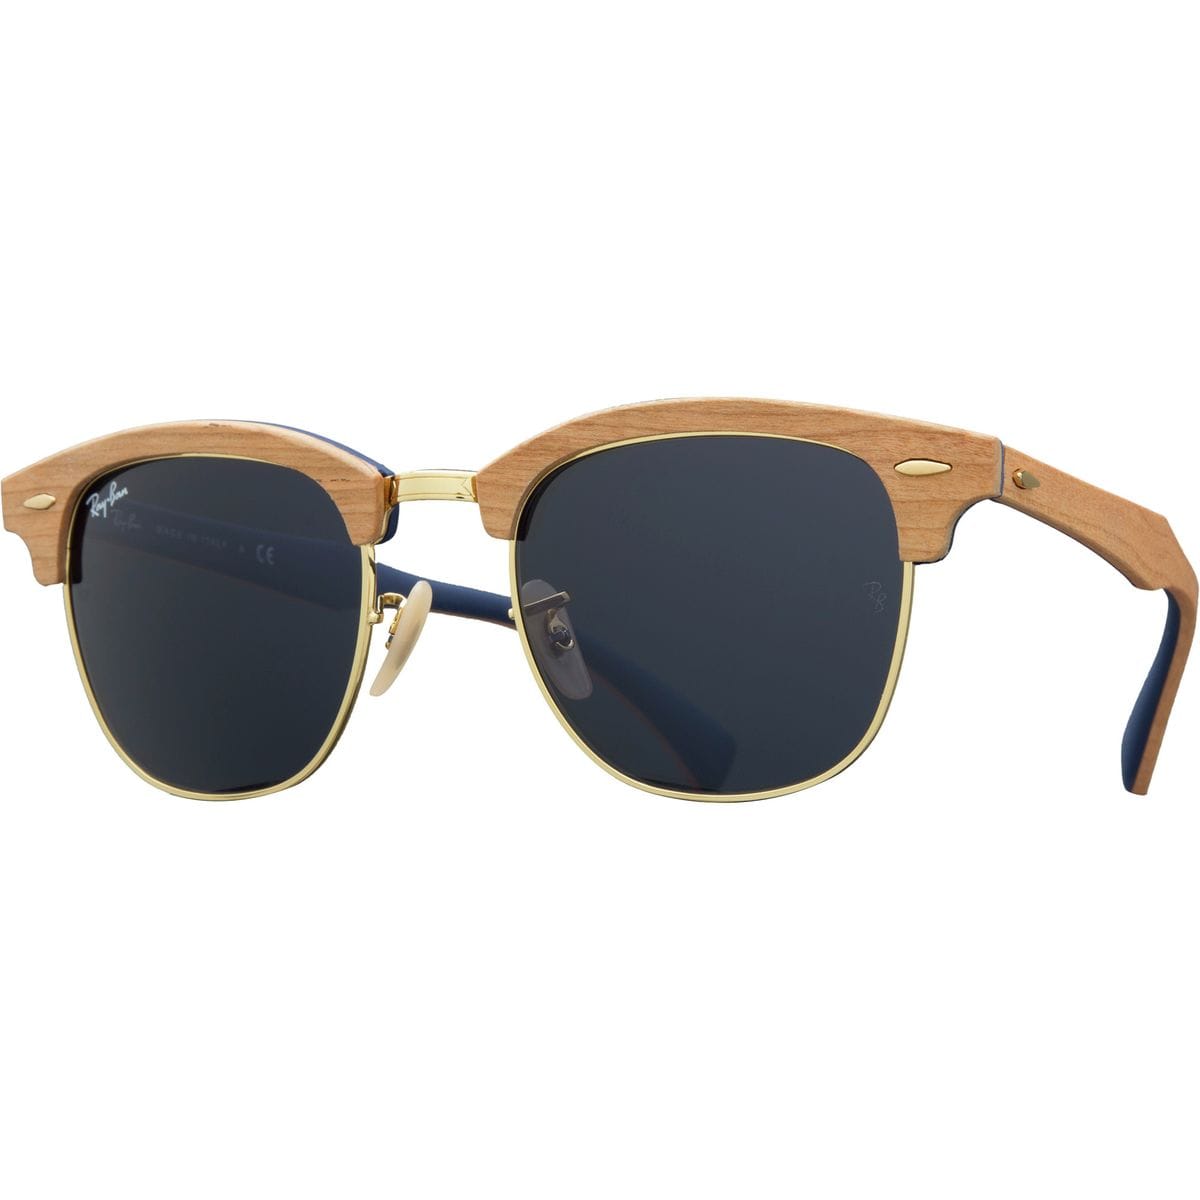 Ray-Ban Clubmaster Wood Sunglasses - Accessories